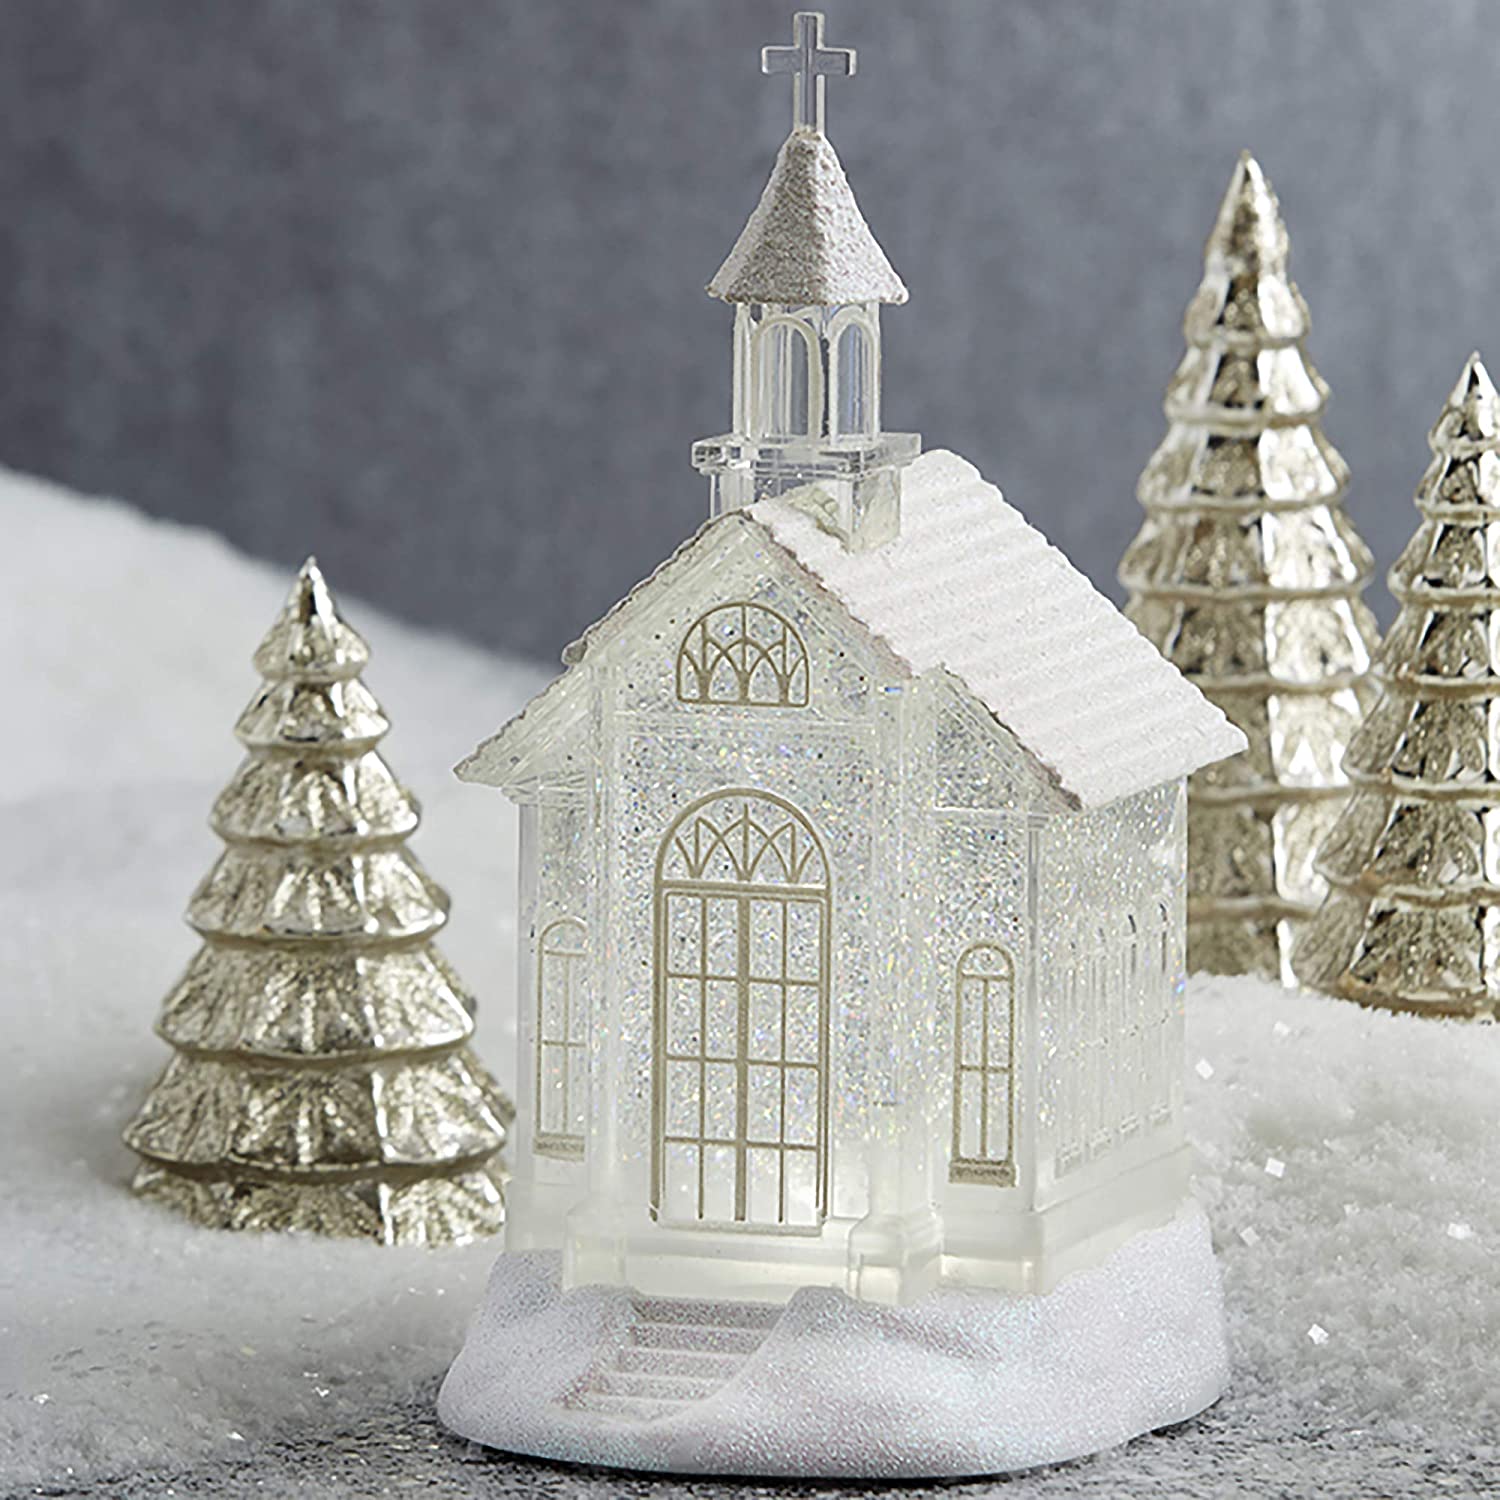 Lighted Ice Sculpture Church - Snow Globe Water Lantern With